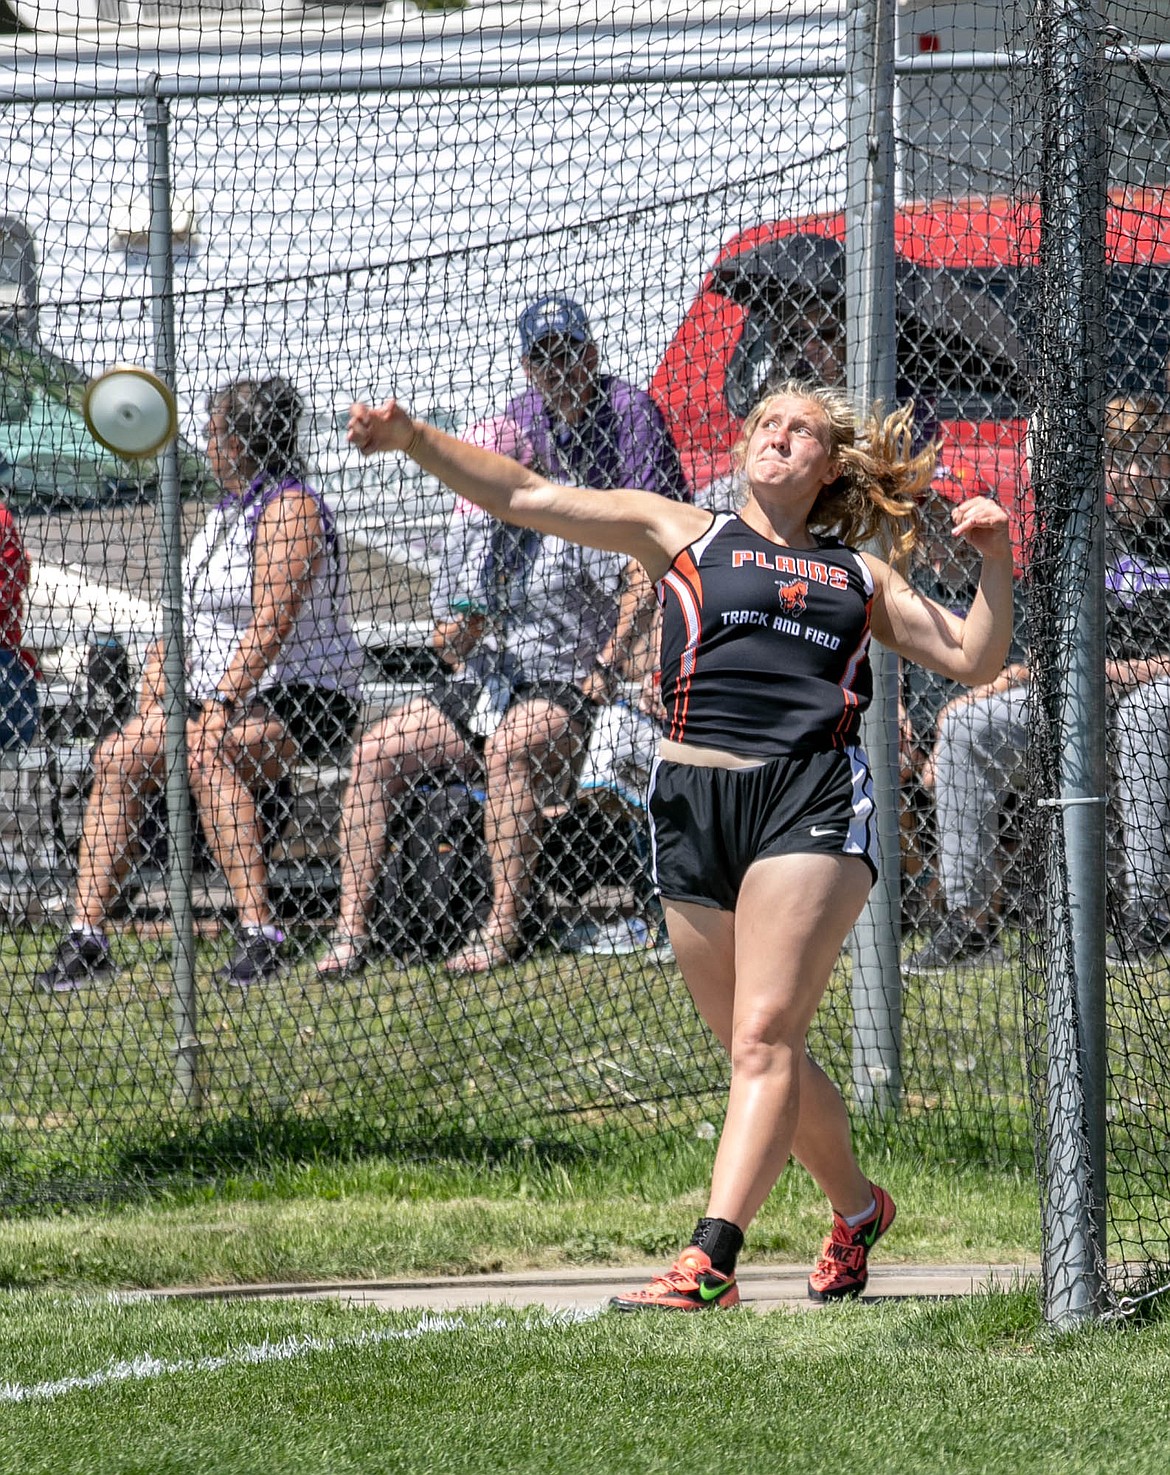 FORMER PLAINS High School thrower Jessica Thompson launches the discus at the MHSA Class C state track tournament in Great Falls. Thompson will now take her talents to Brigham Young University. (photo by Kylie Richter/Special to the Valley Press)